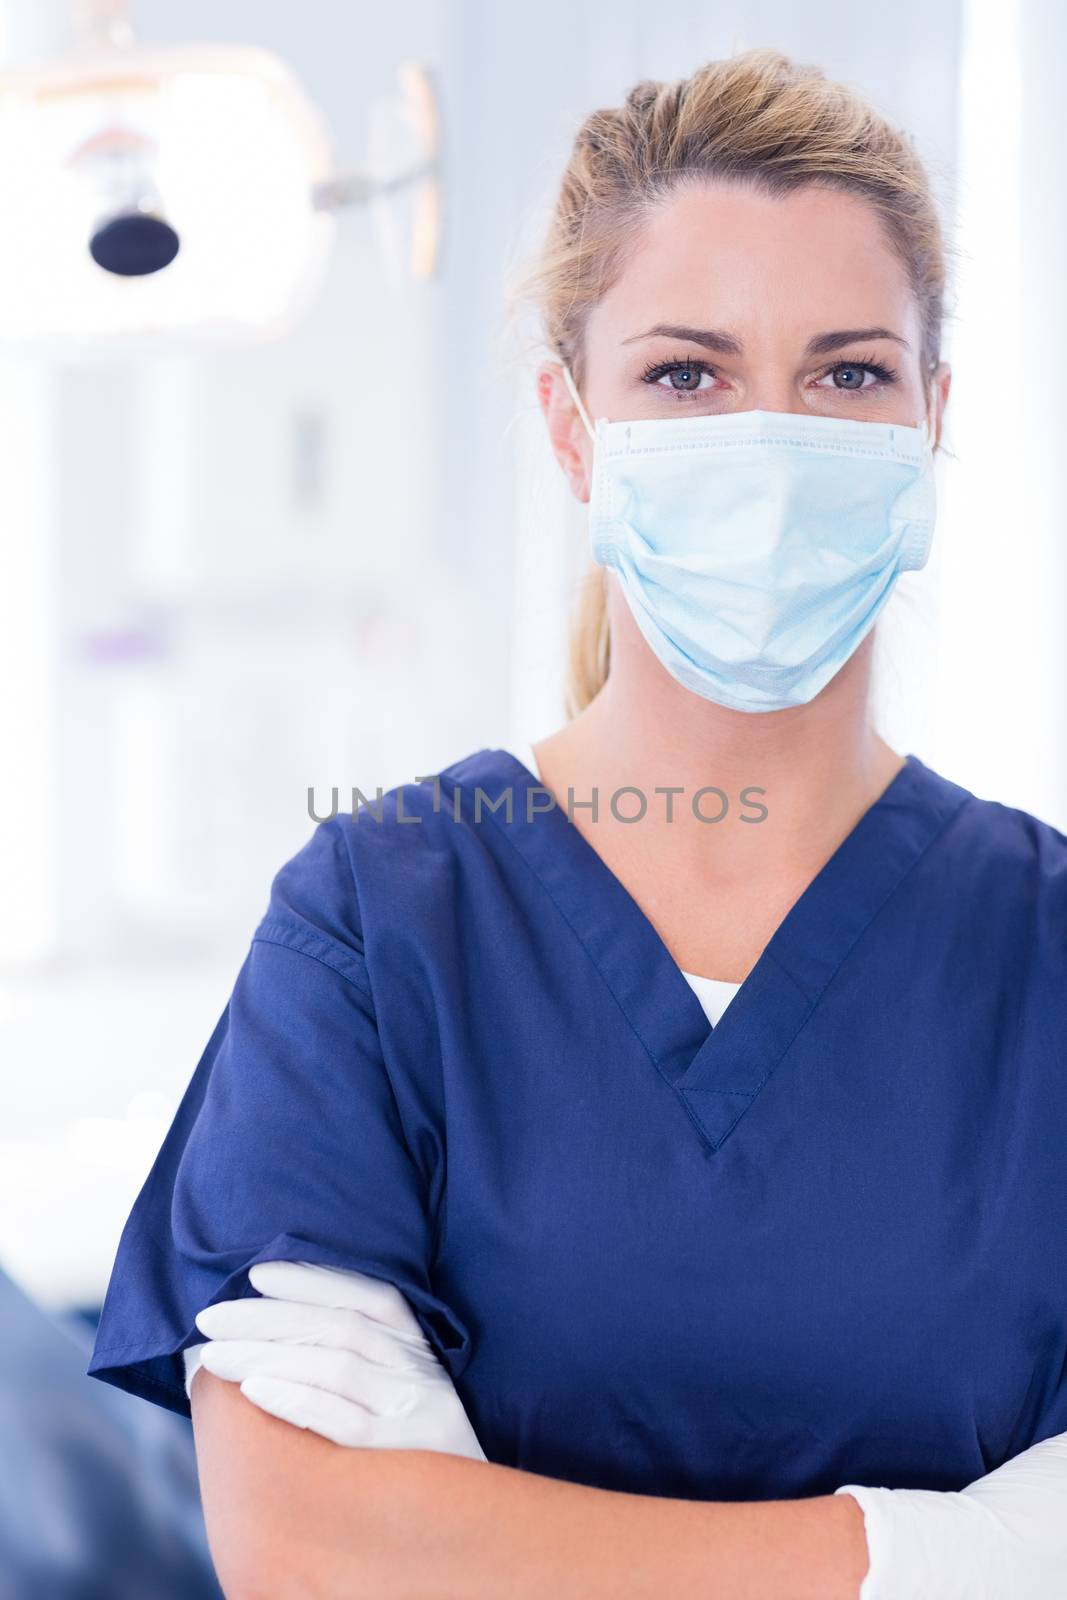 Dentist in mask looking at camera with arms crossed by Wavebreakmedia